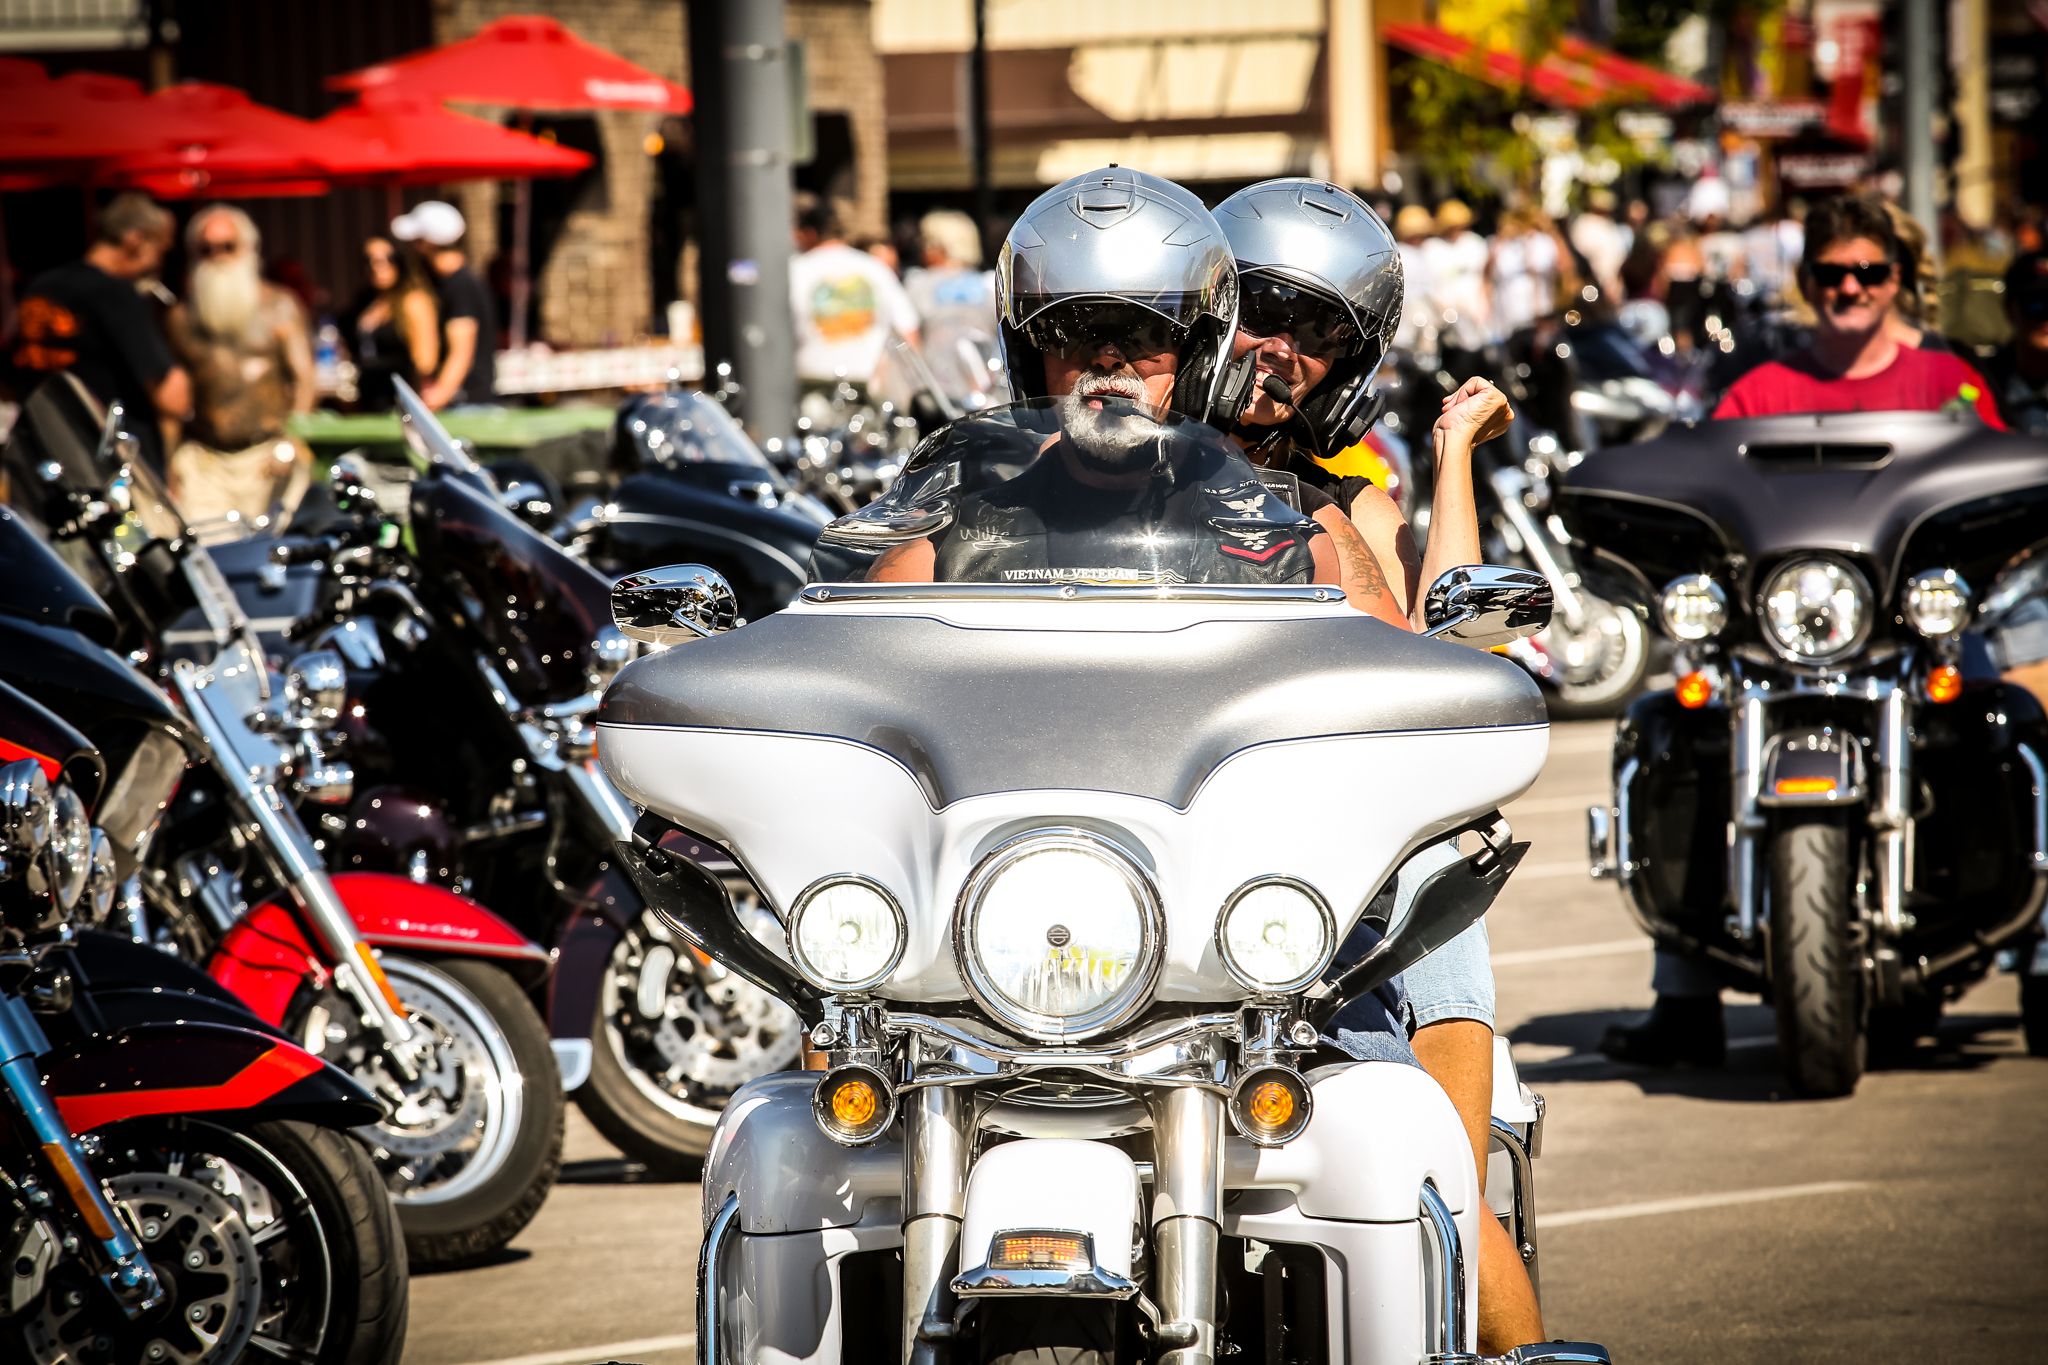 Exploring Motorcycle Culture: Clubs, Rallies, and Events